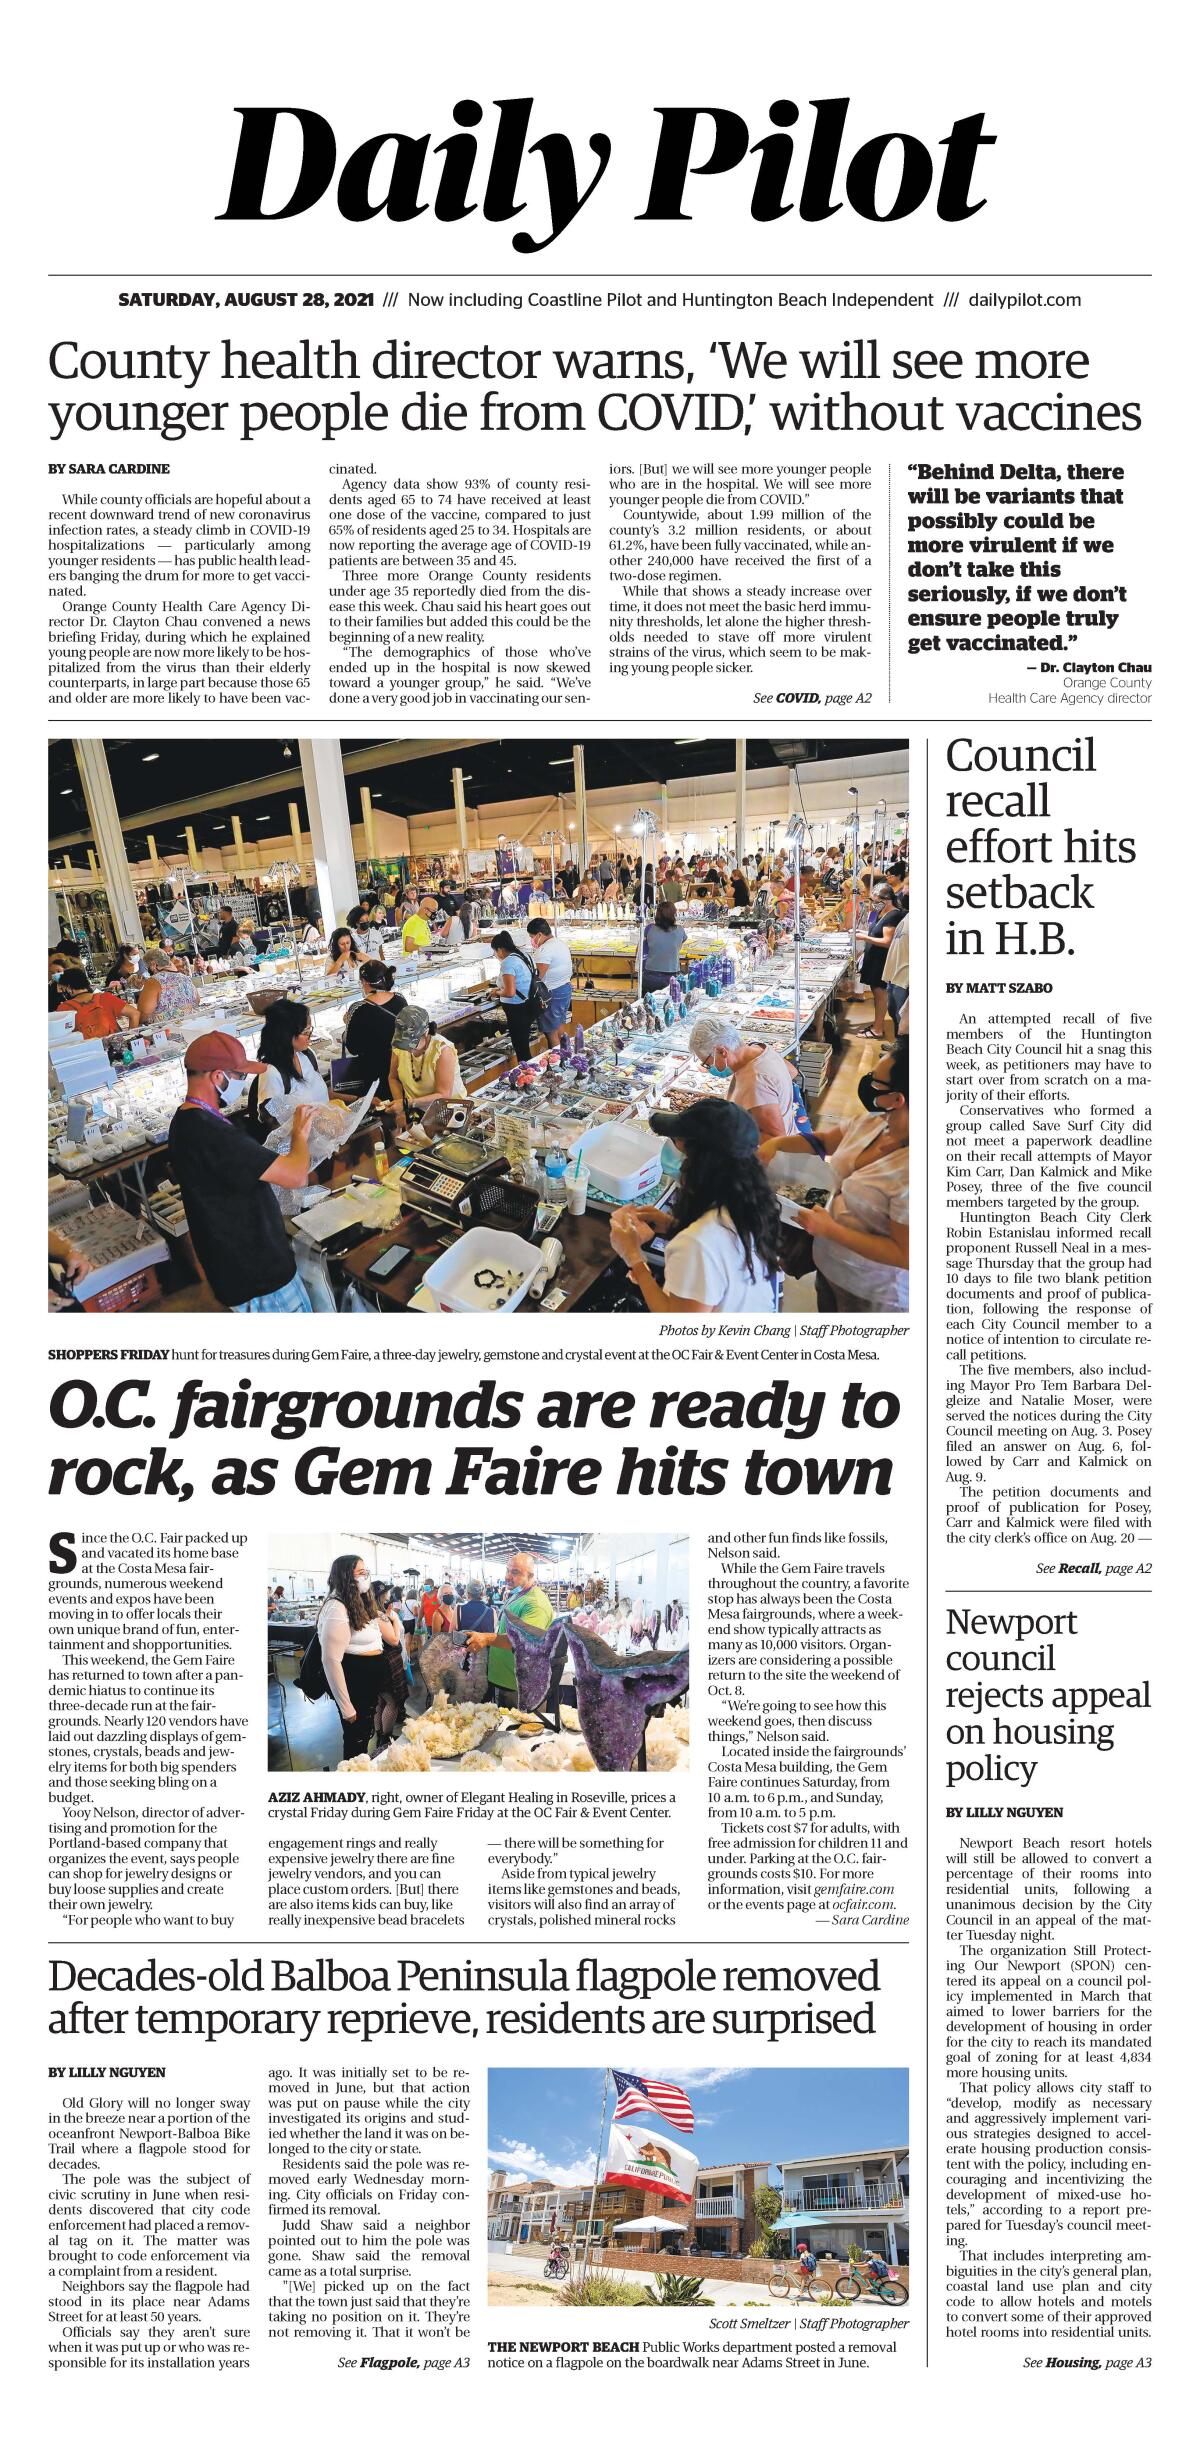 Front page of Daily Pilot e-newspaper for Saturday, August 28, 2021.